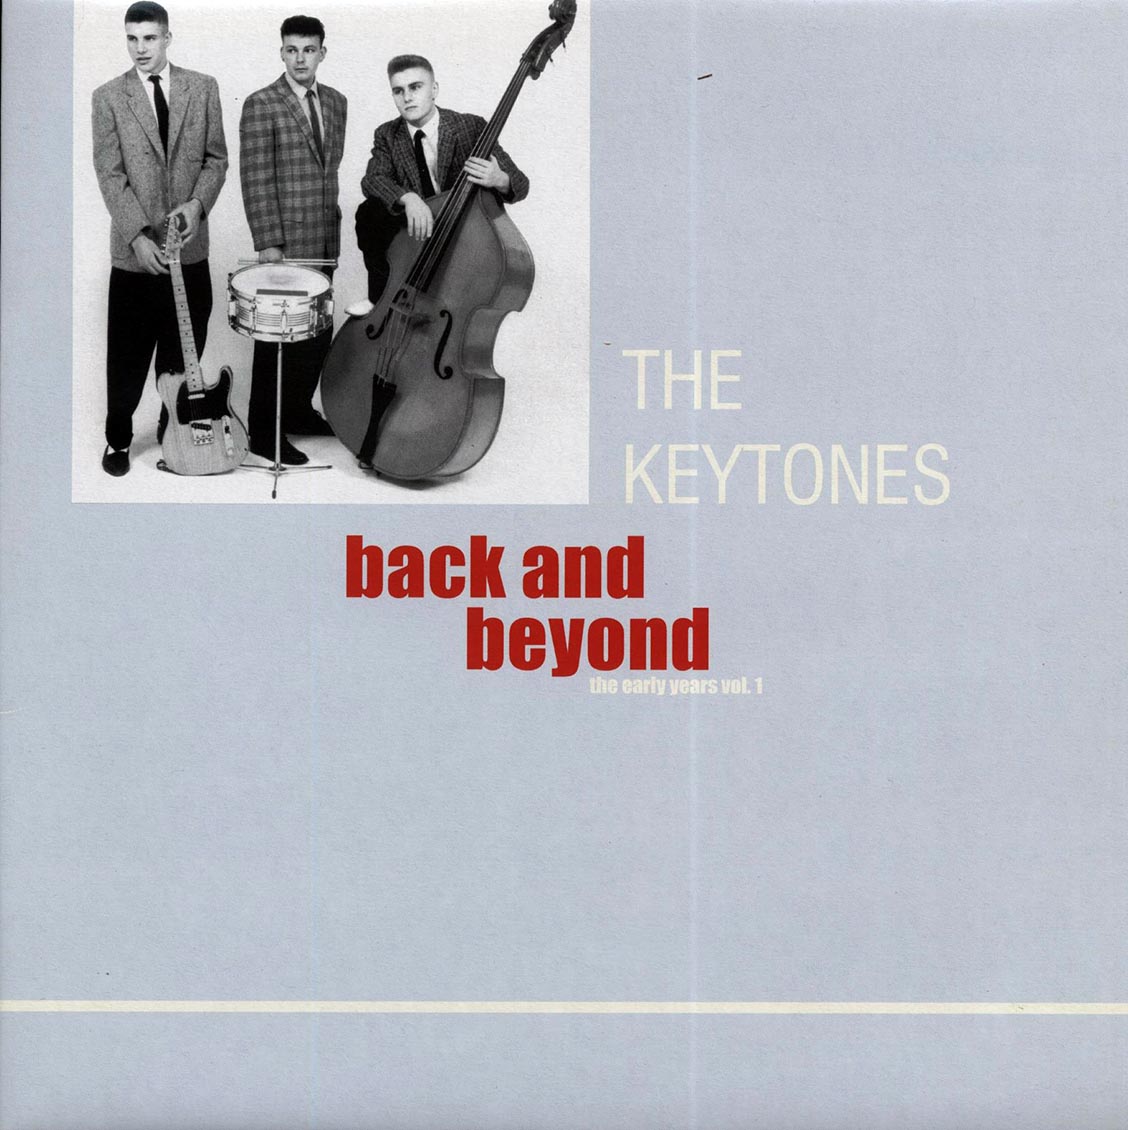 The Keytones - Back and Beyond (The Early Years Vol. 1) [2007 Reissue] [New Vinyl Record LP]